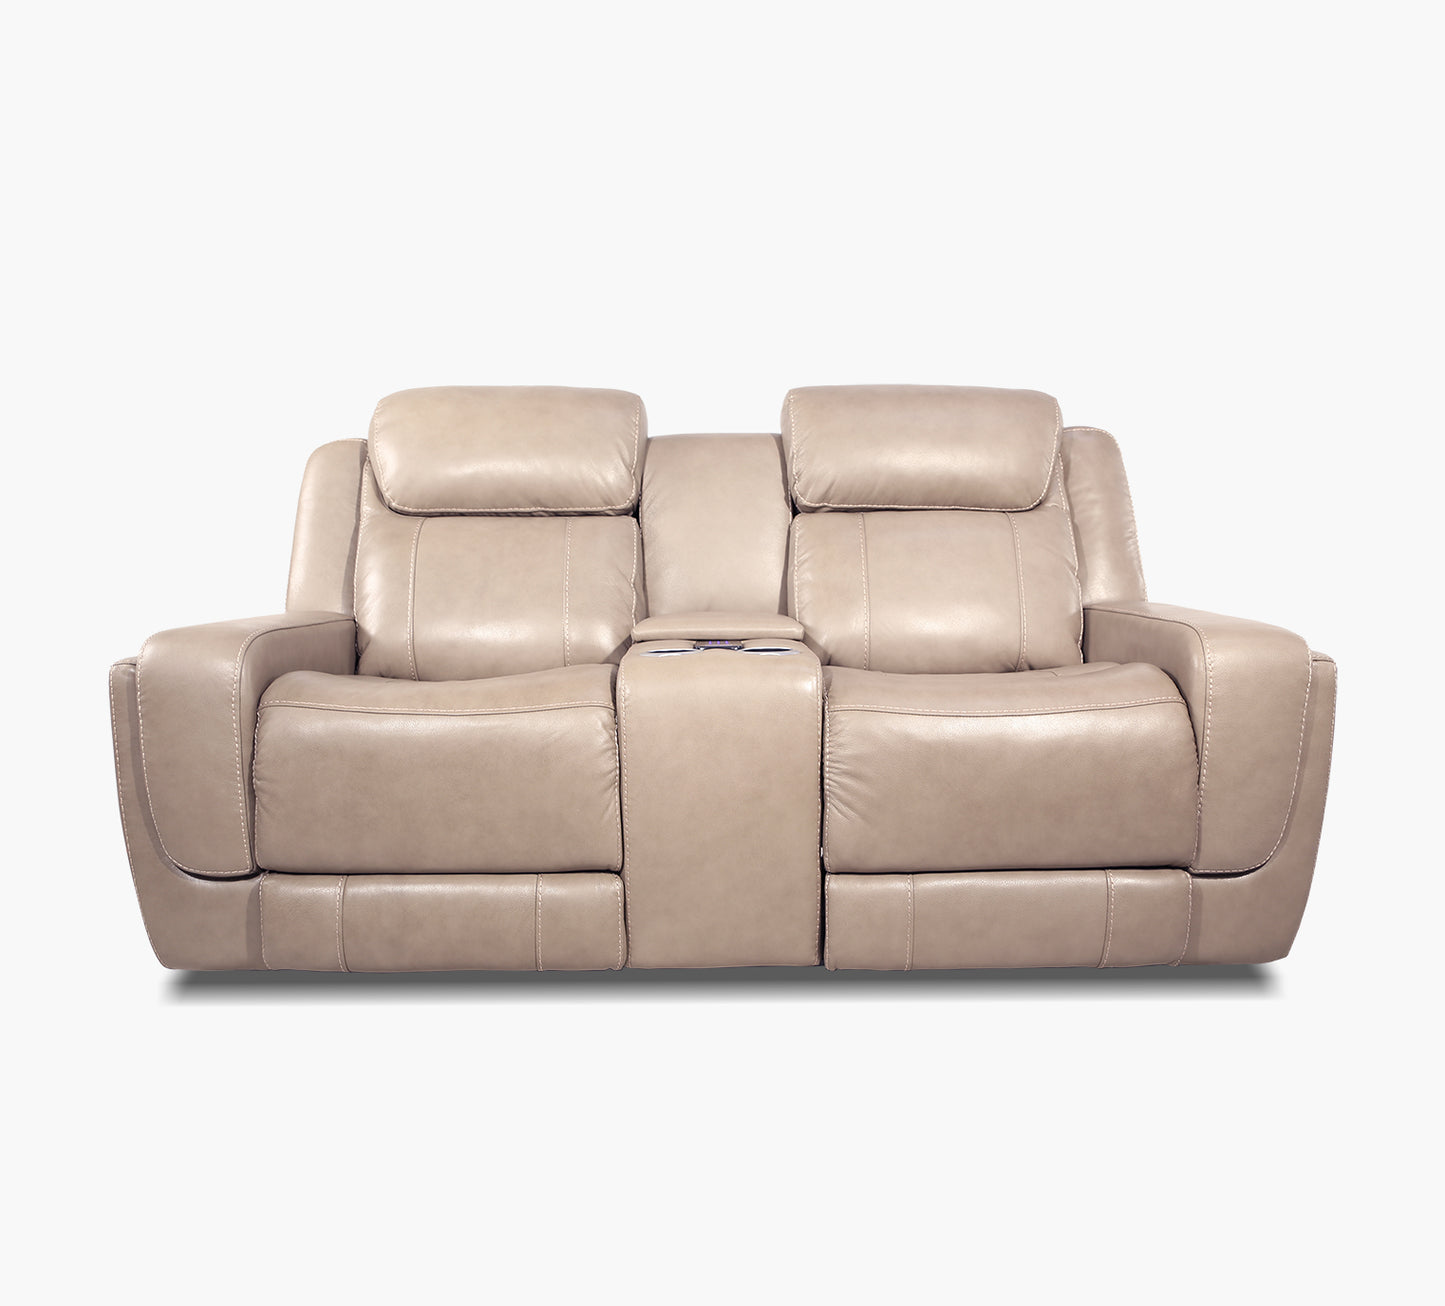 Woodford Fawn Leather Triple Power Console Loveseat